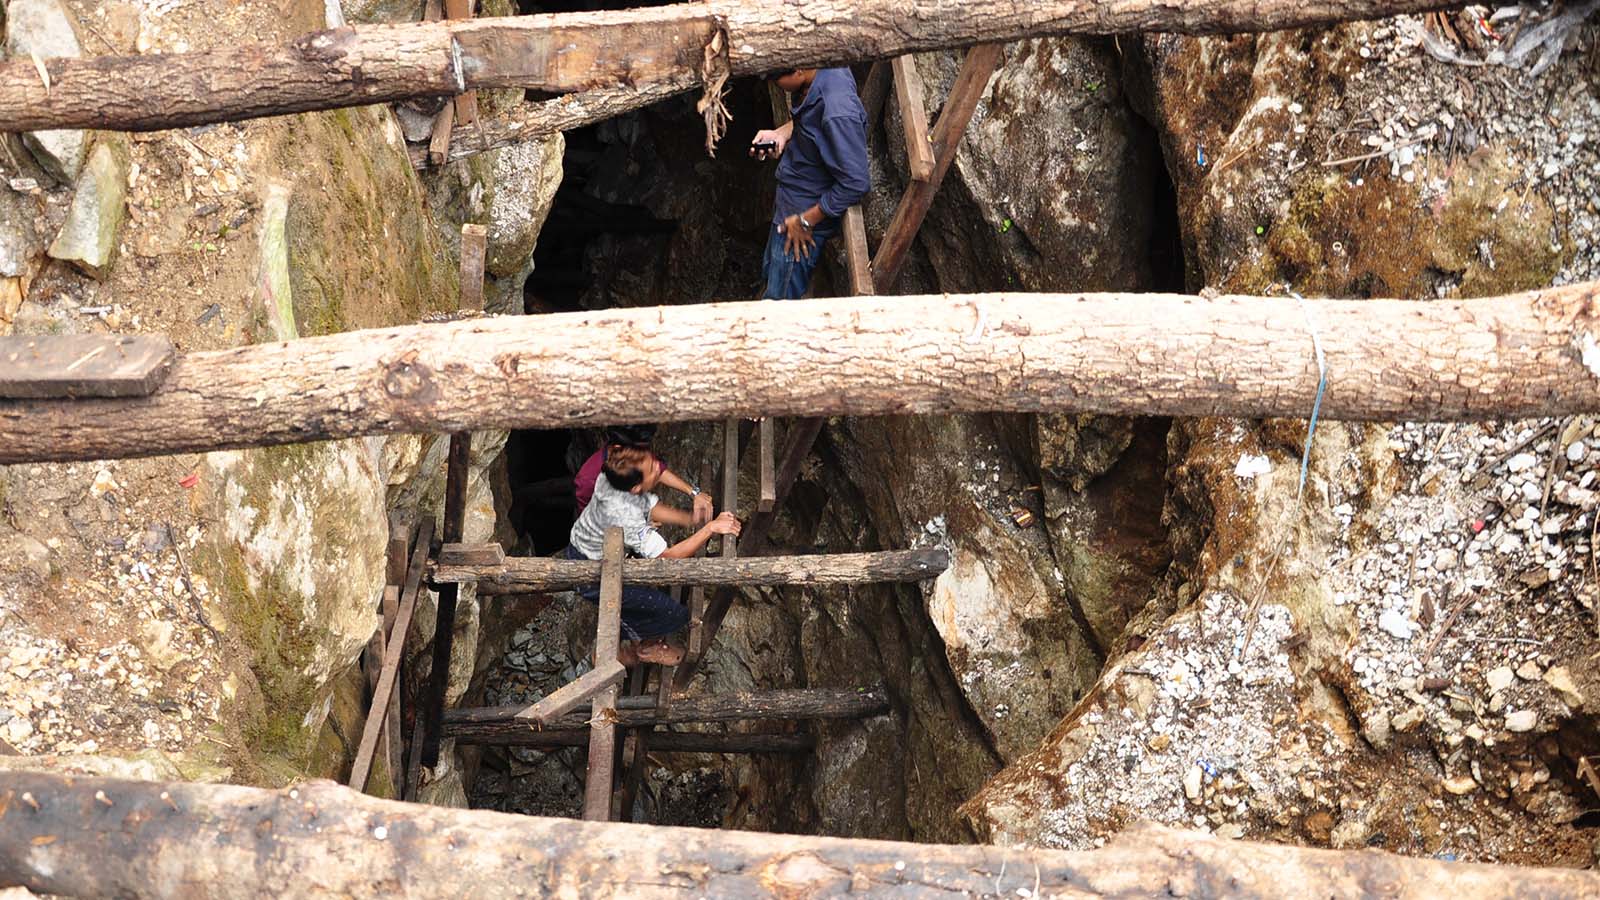 Mandalay Region’s Department of Mines granted to permit artisanal and small-scale mining business in order to reduce illegal mining and create jobs for locals 